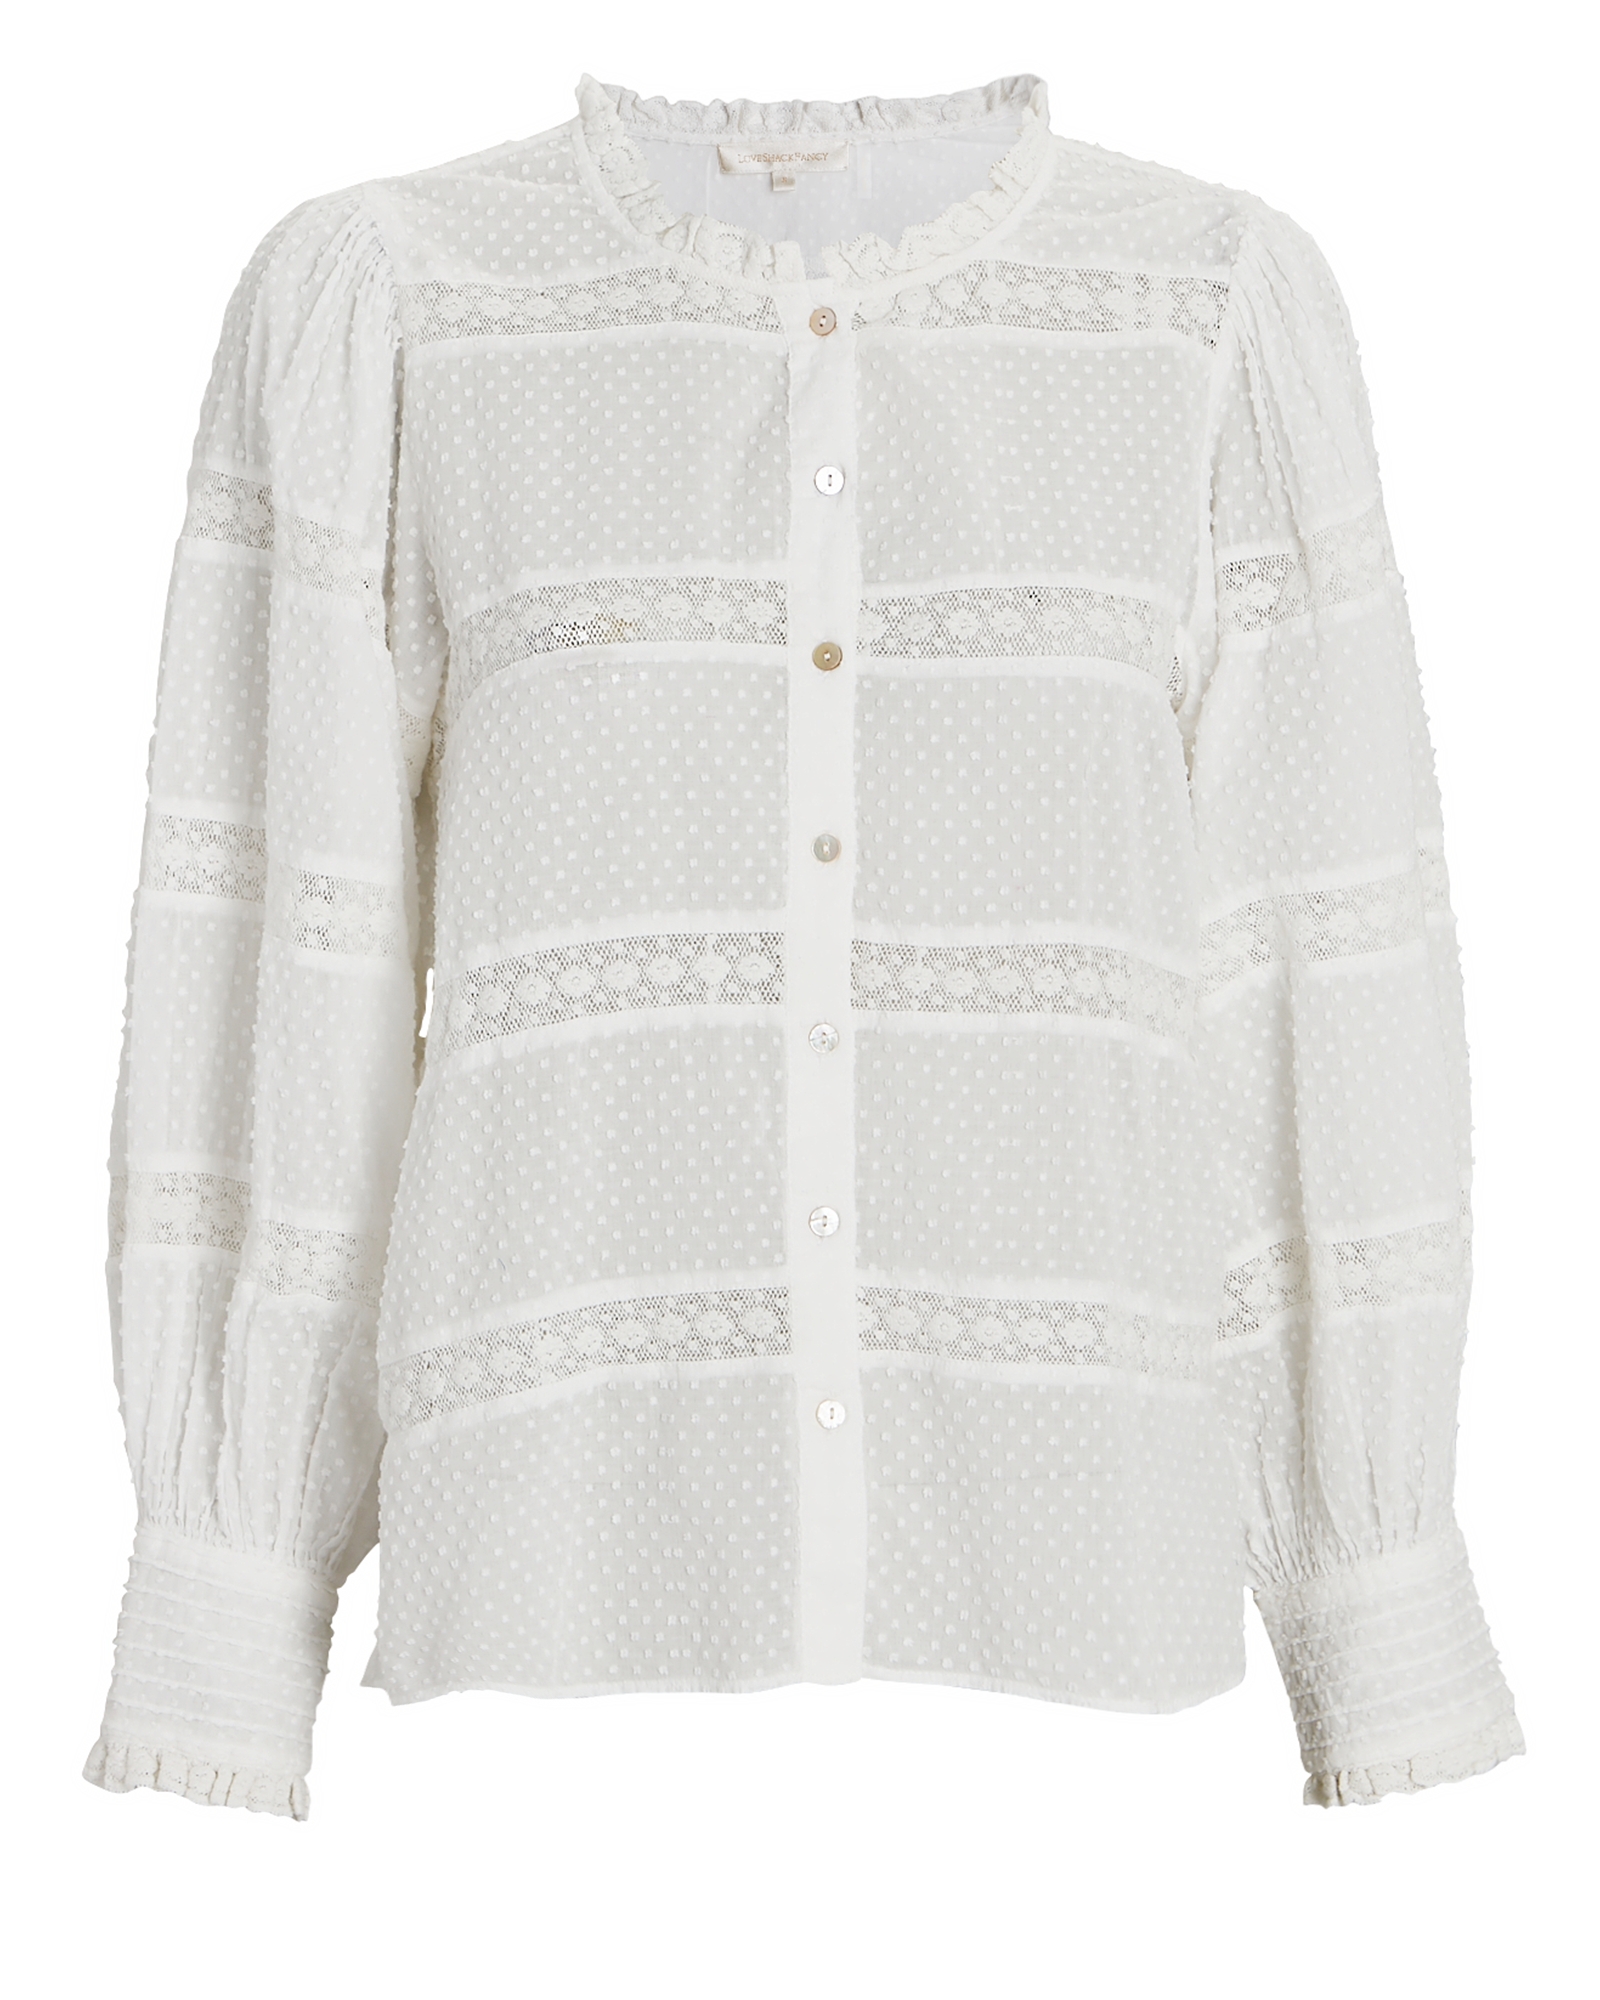 LoveShackFancy Rochelle Embroidered Blouse | INTERMIX®